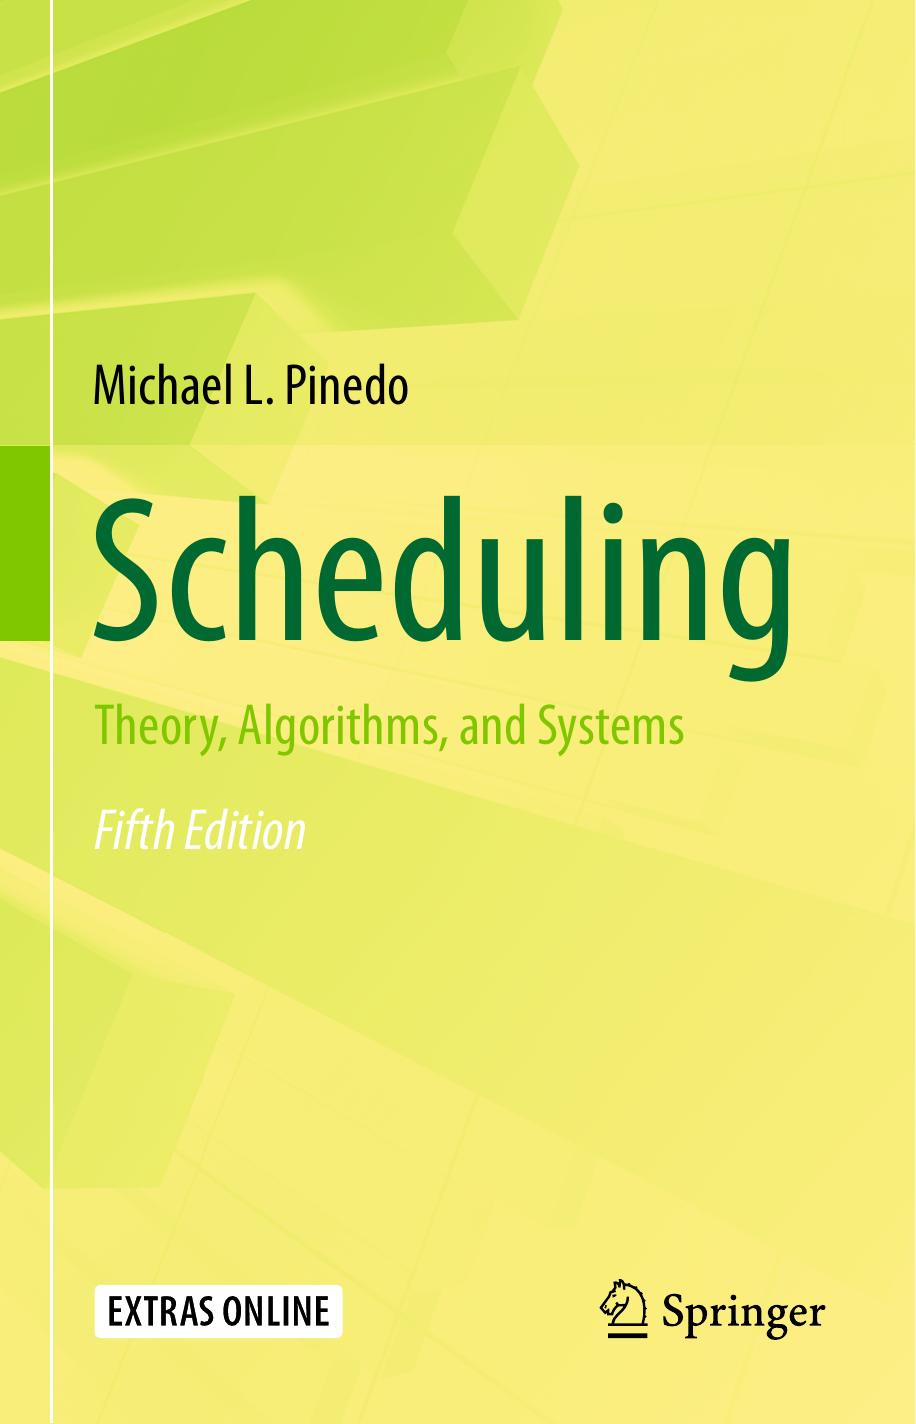 Scheduling Theory Algorithms and Systems 5th Edition Michael L. Pinedo未知Textbooks Solutions